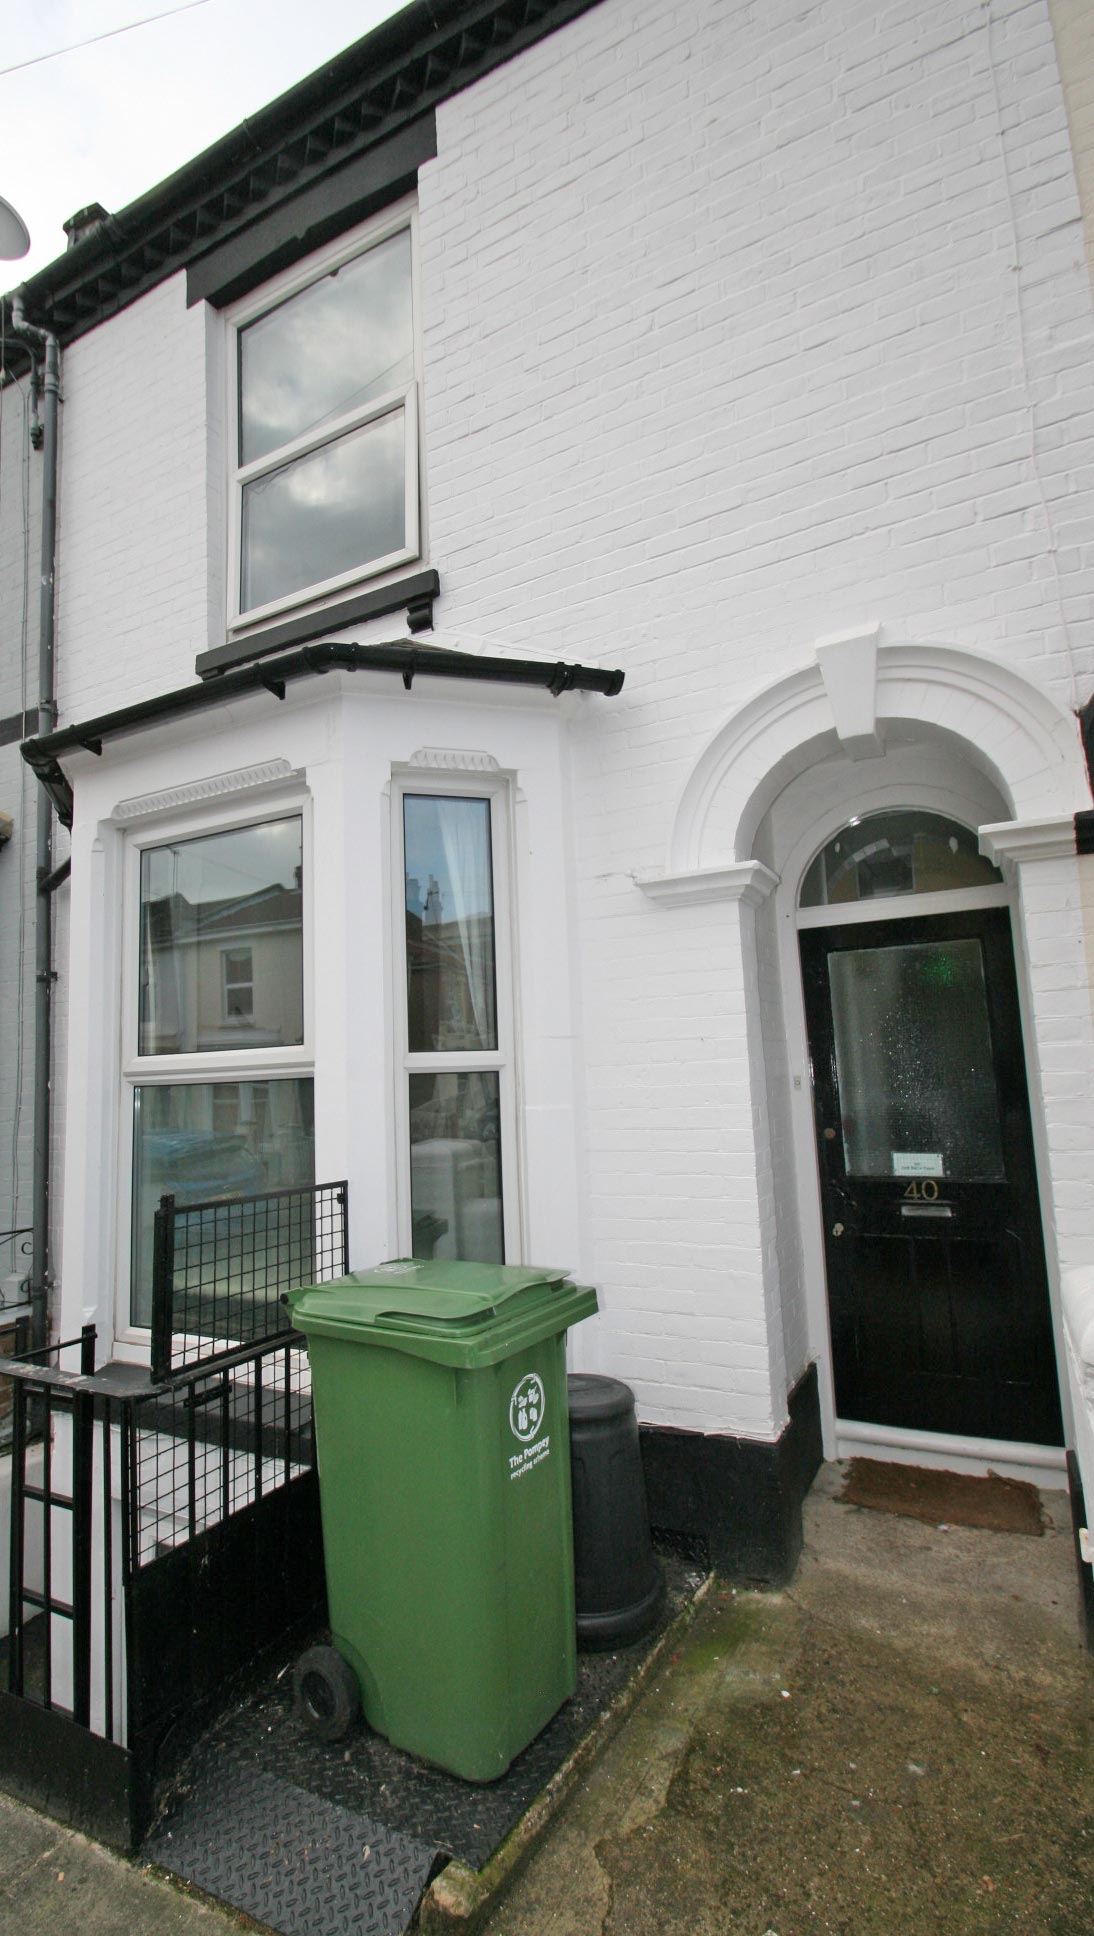 6 bed student house Pains Road Portsmouth